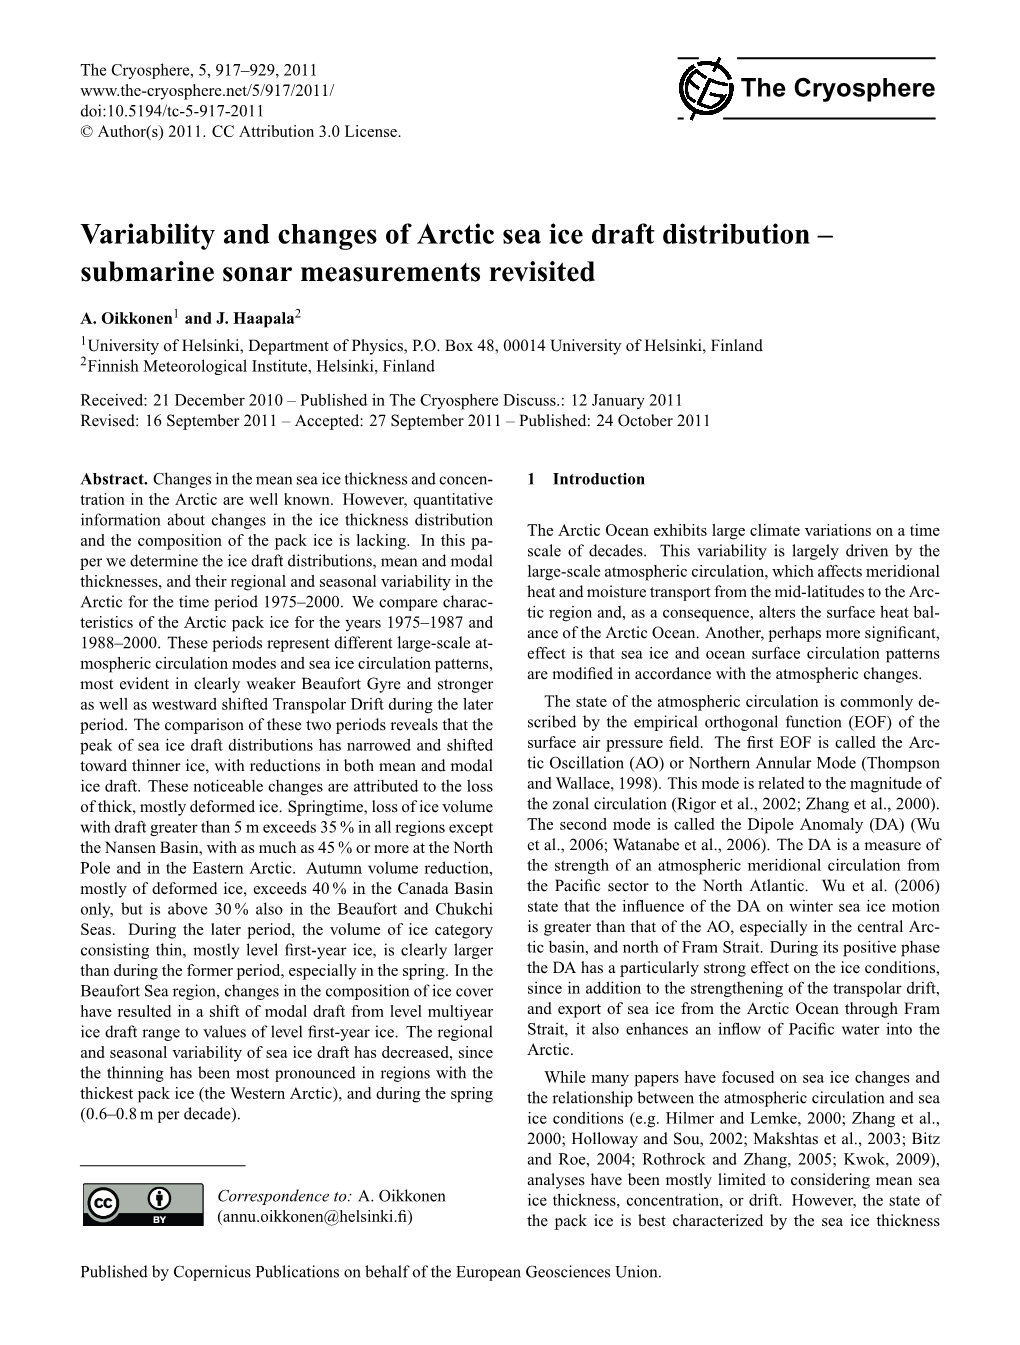 Variability and Changes of Arctic Sea Ice Draft Distribution – Submarine Sonar Measurements Revisited